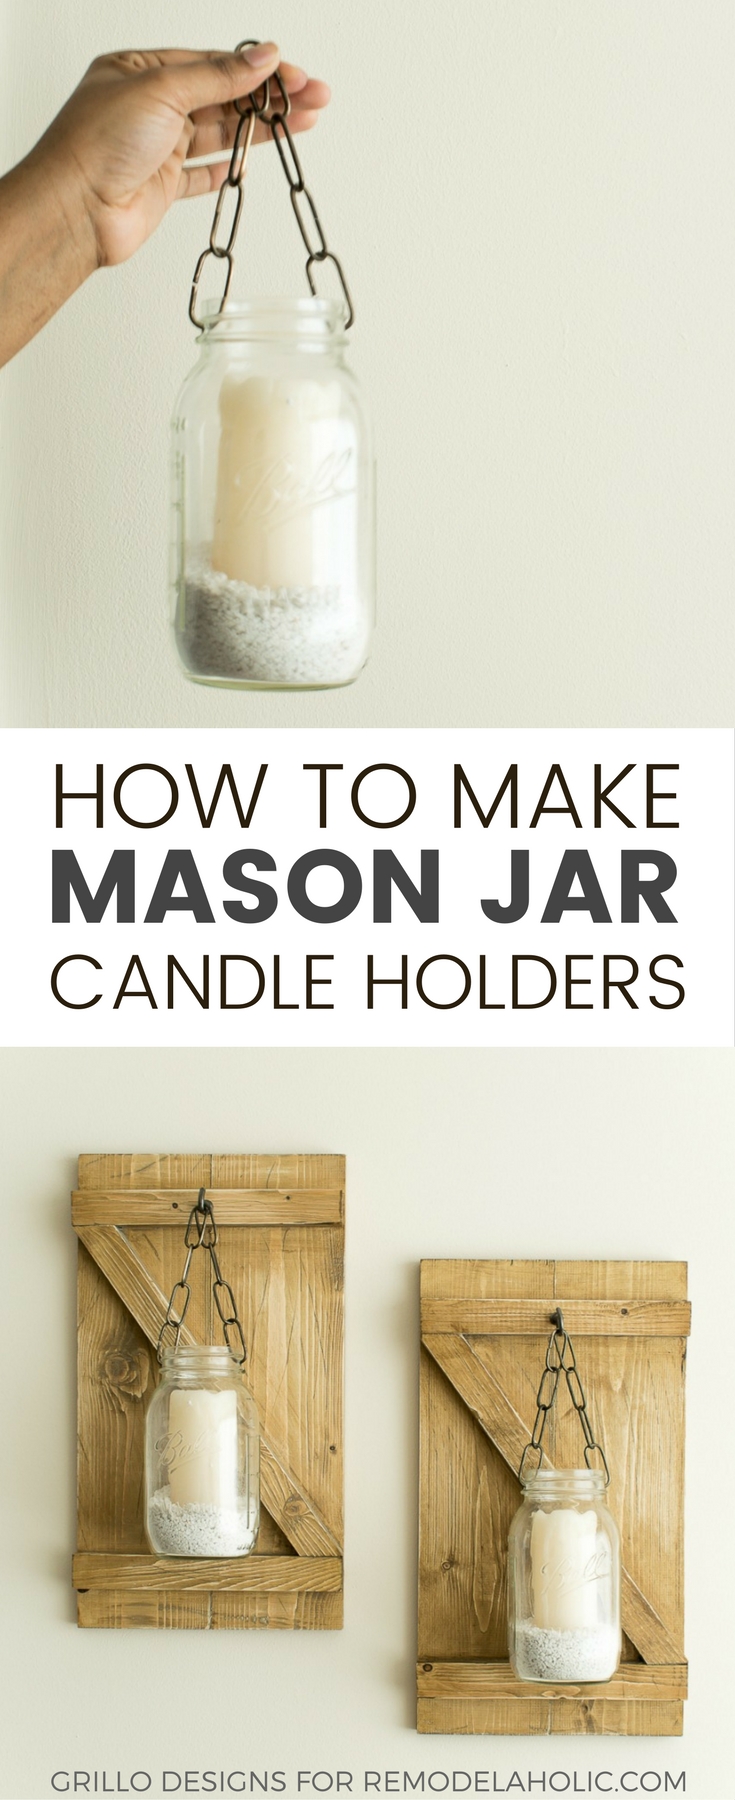 how to make hanging mason jar candle holders